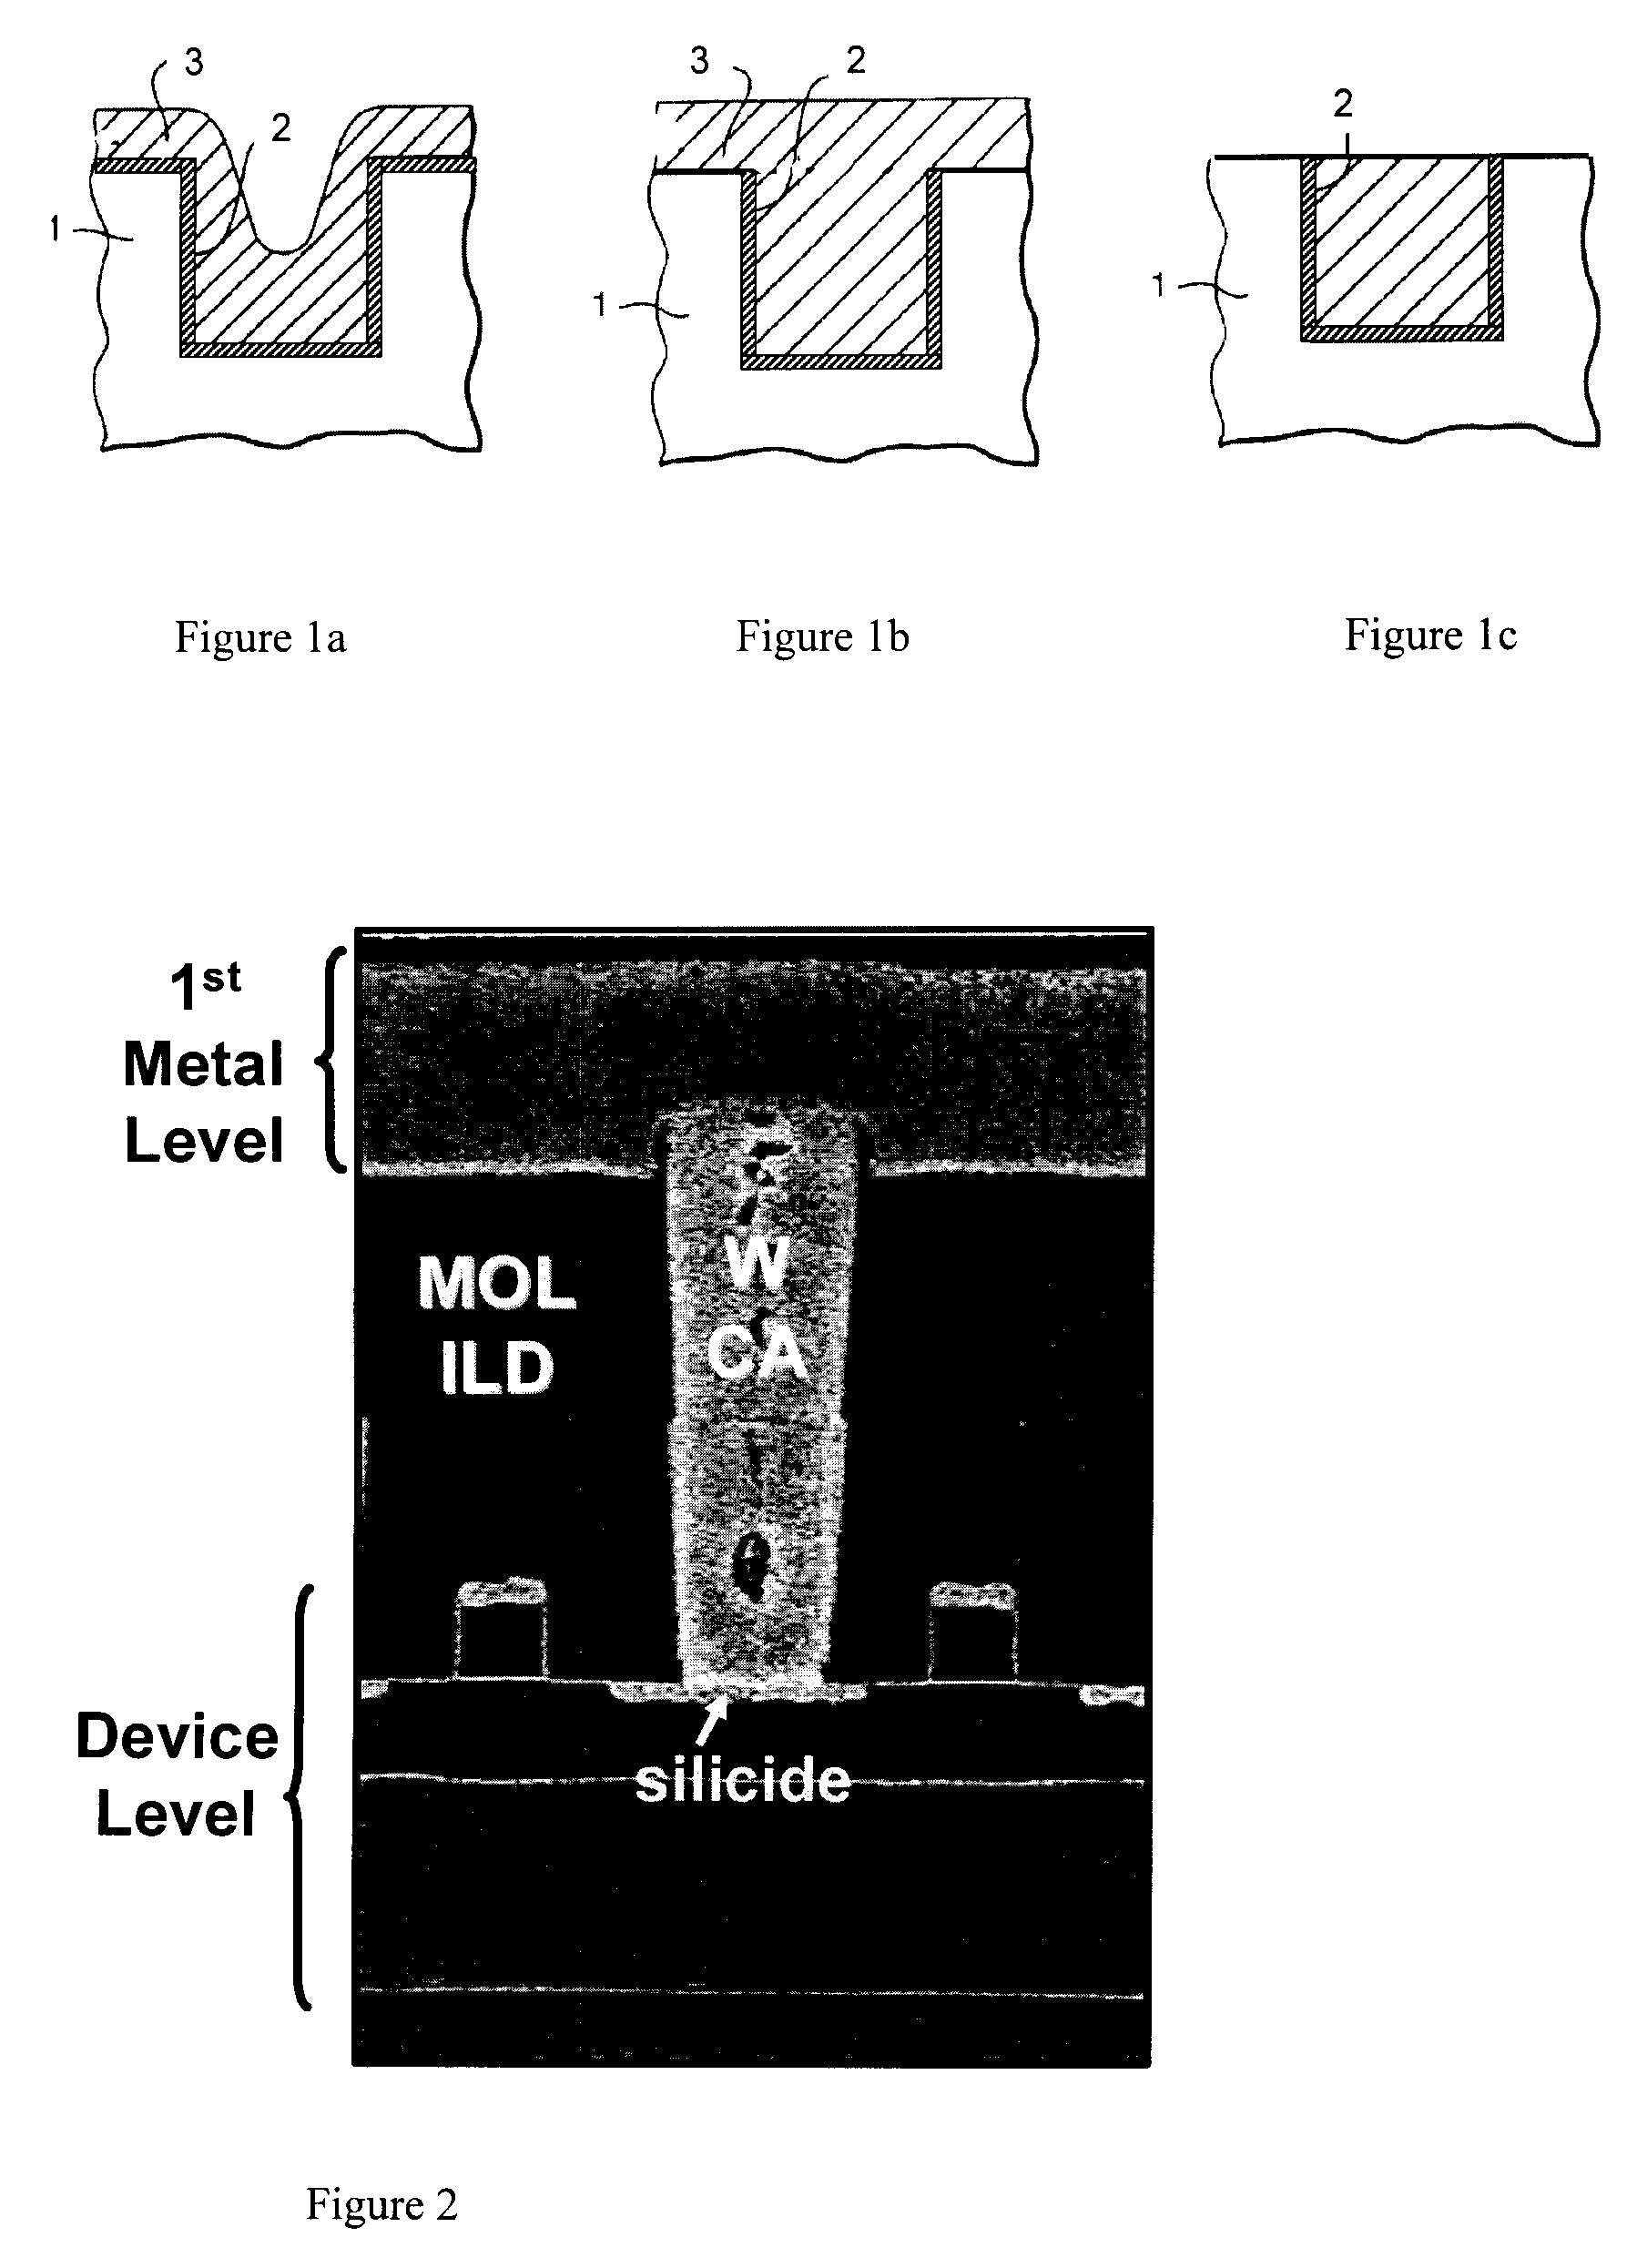 Fabricating a contact rhodium structure by electroplating and electroplating composition